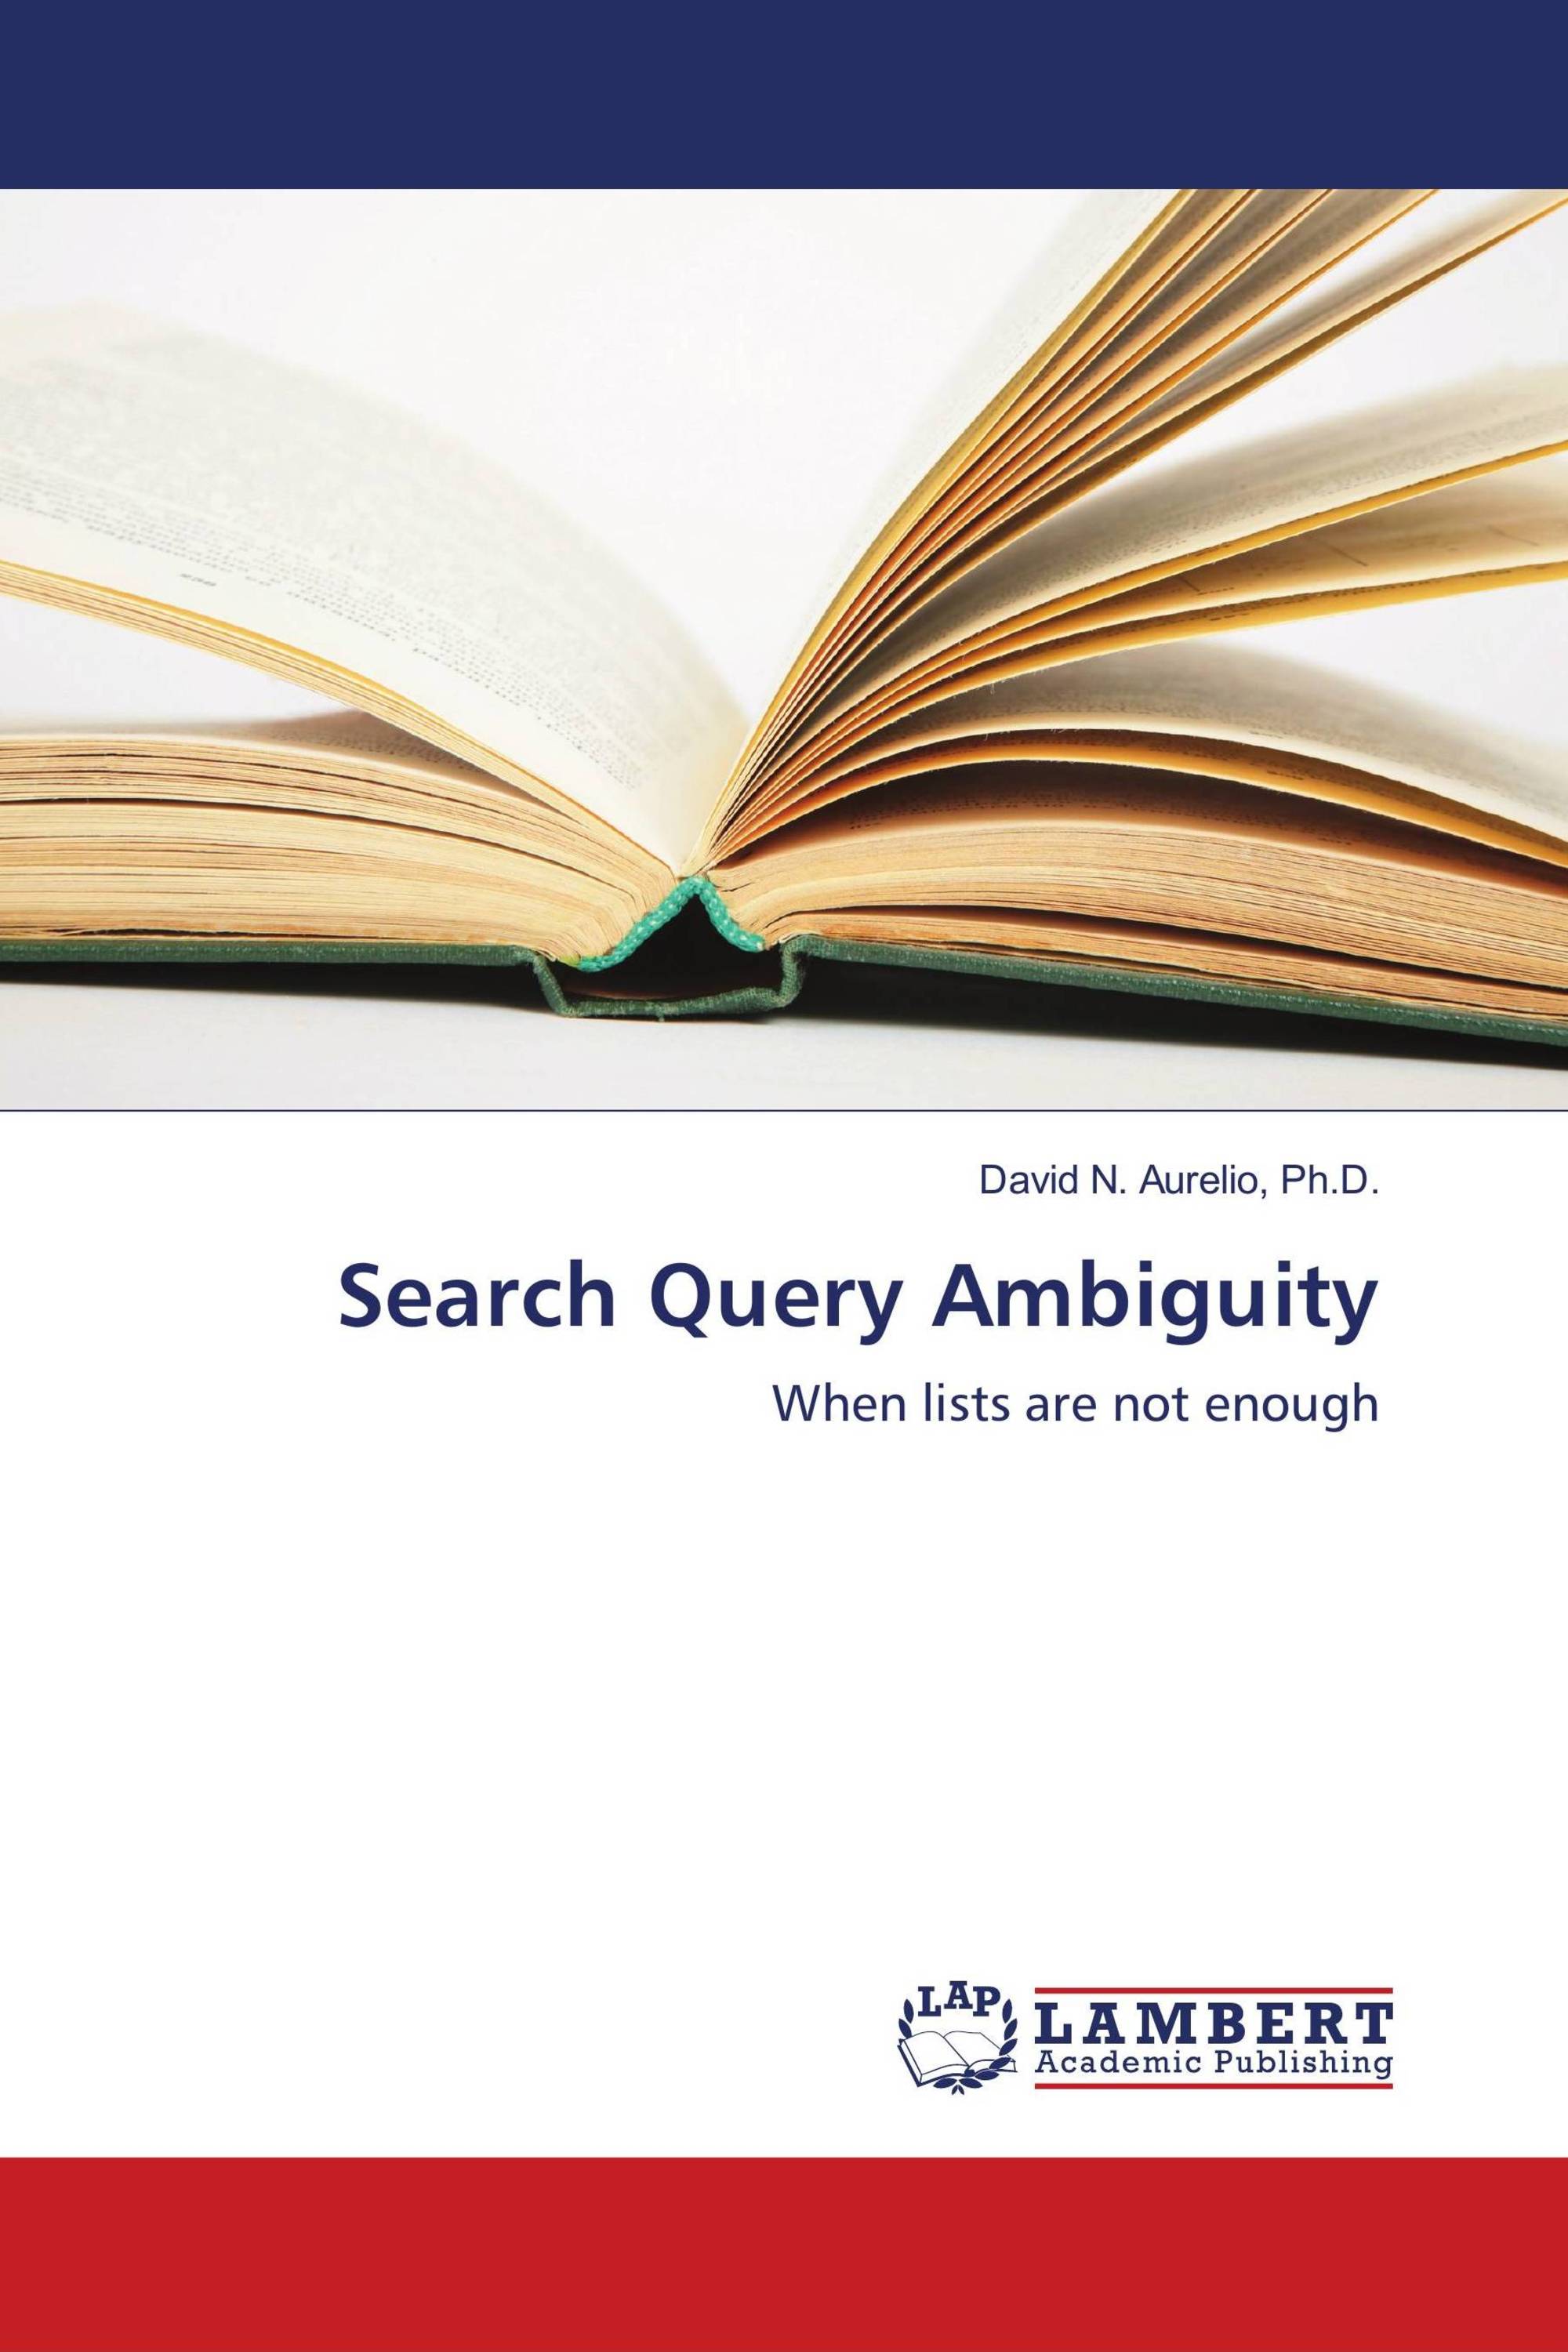 Search Query Ambiguity